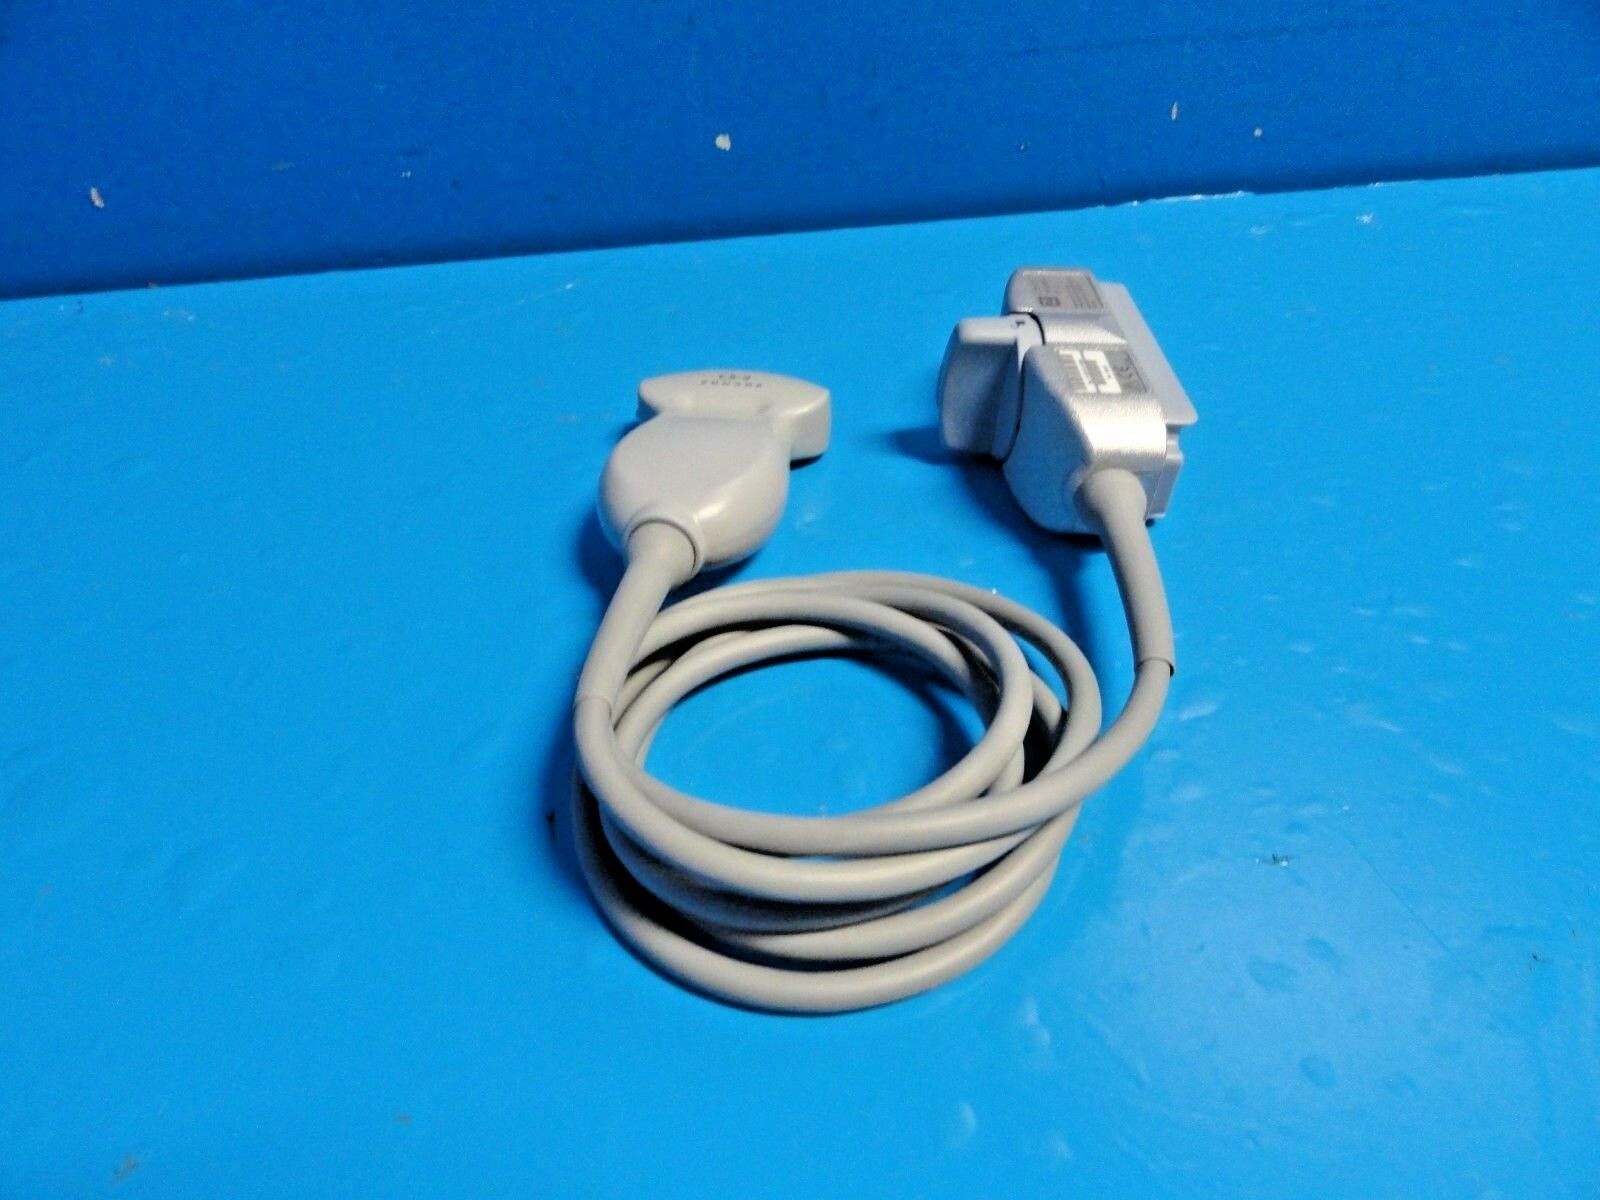 Zonare C5-2 P/N 84001 Convex / Curved Array Ultrasound Transducer Probe ~15743 DIAGNOSTIC ULTRASOUND MACHINES FOR SALE